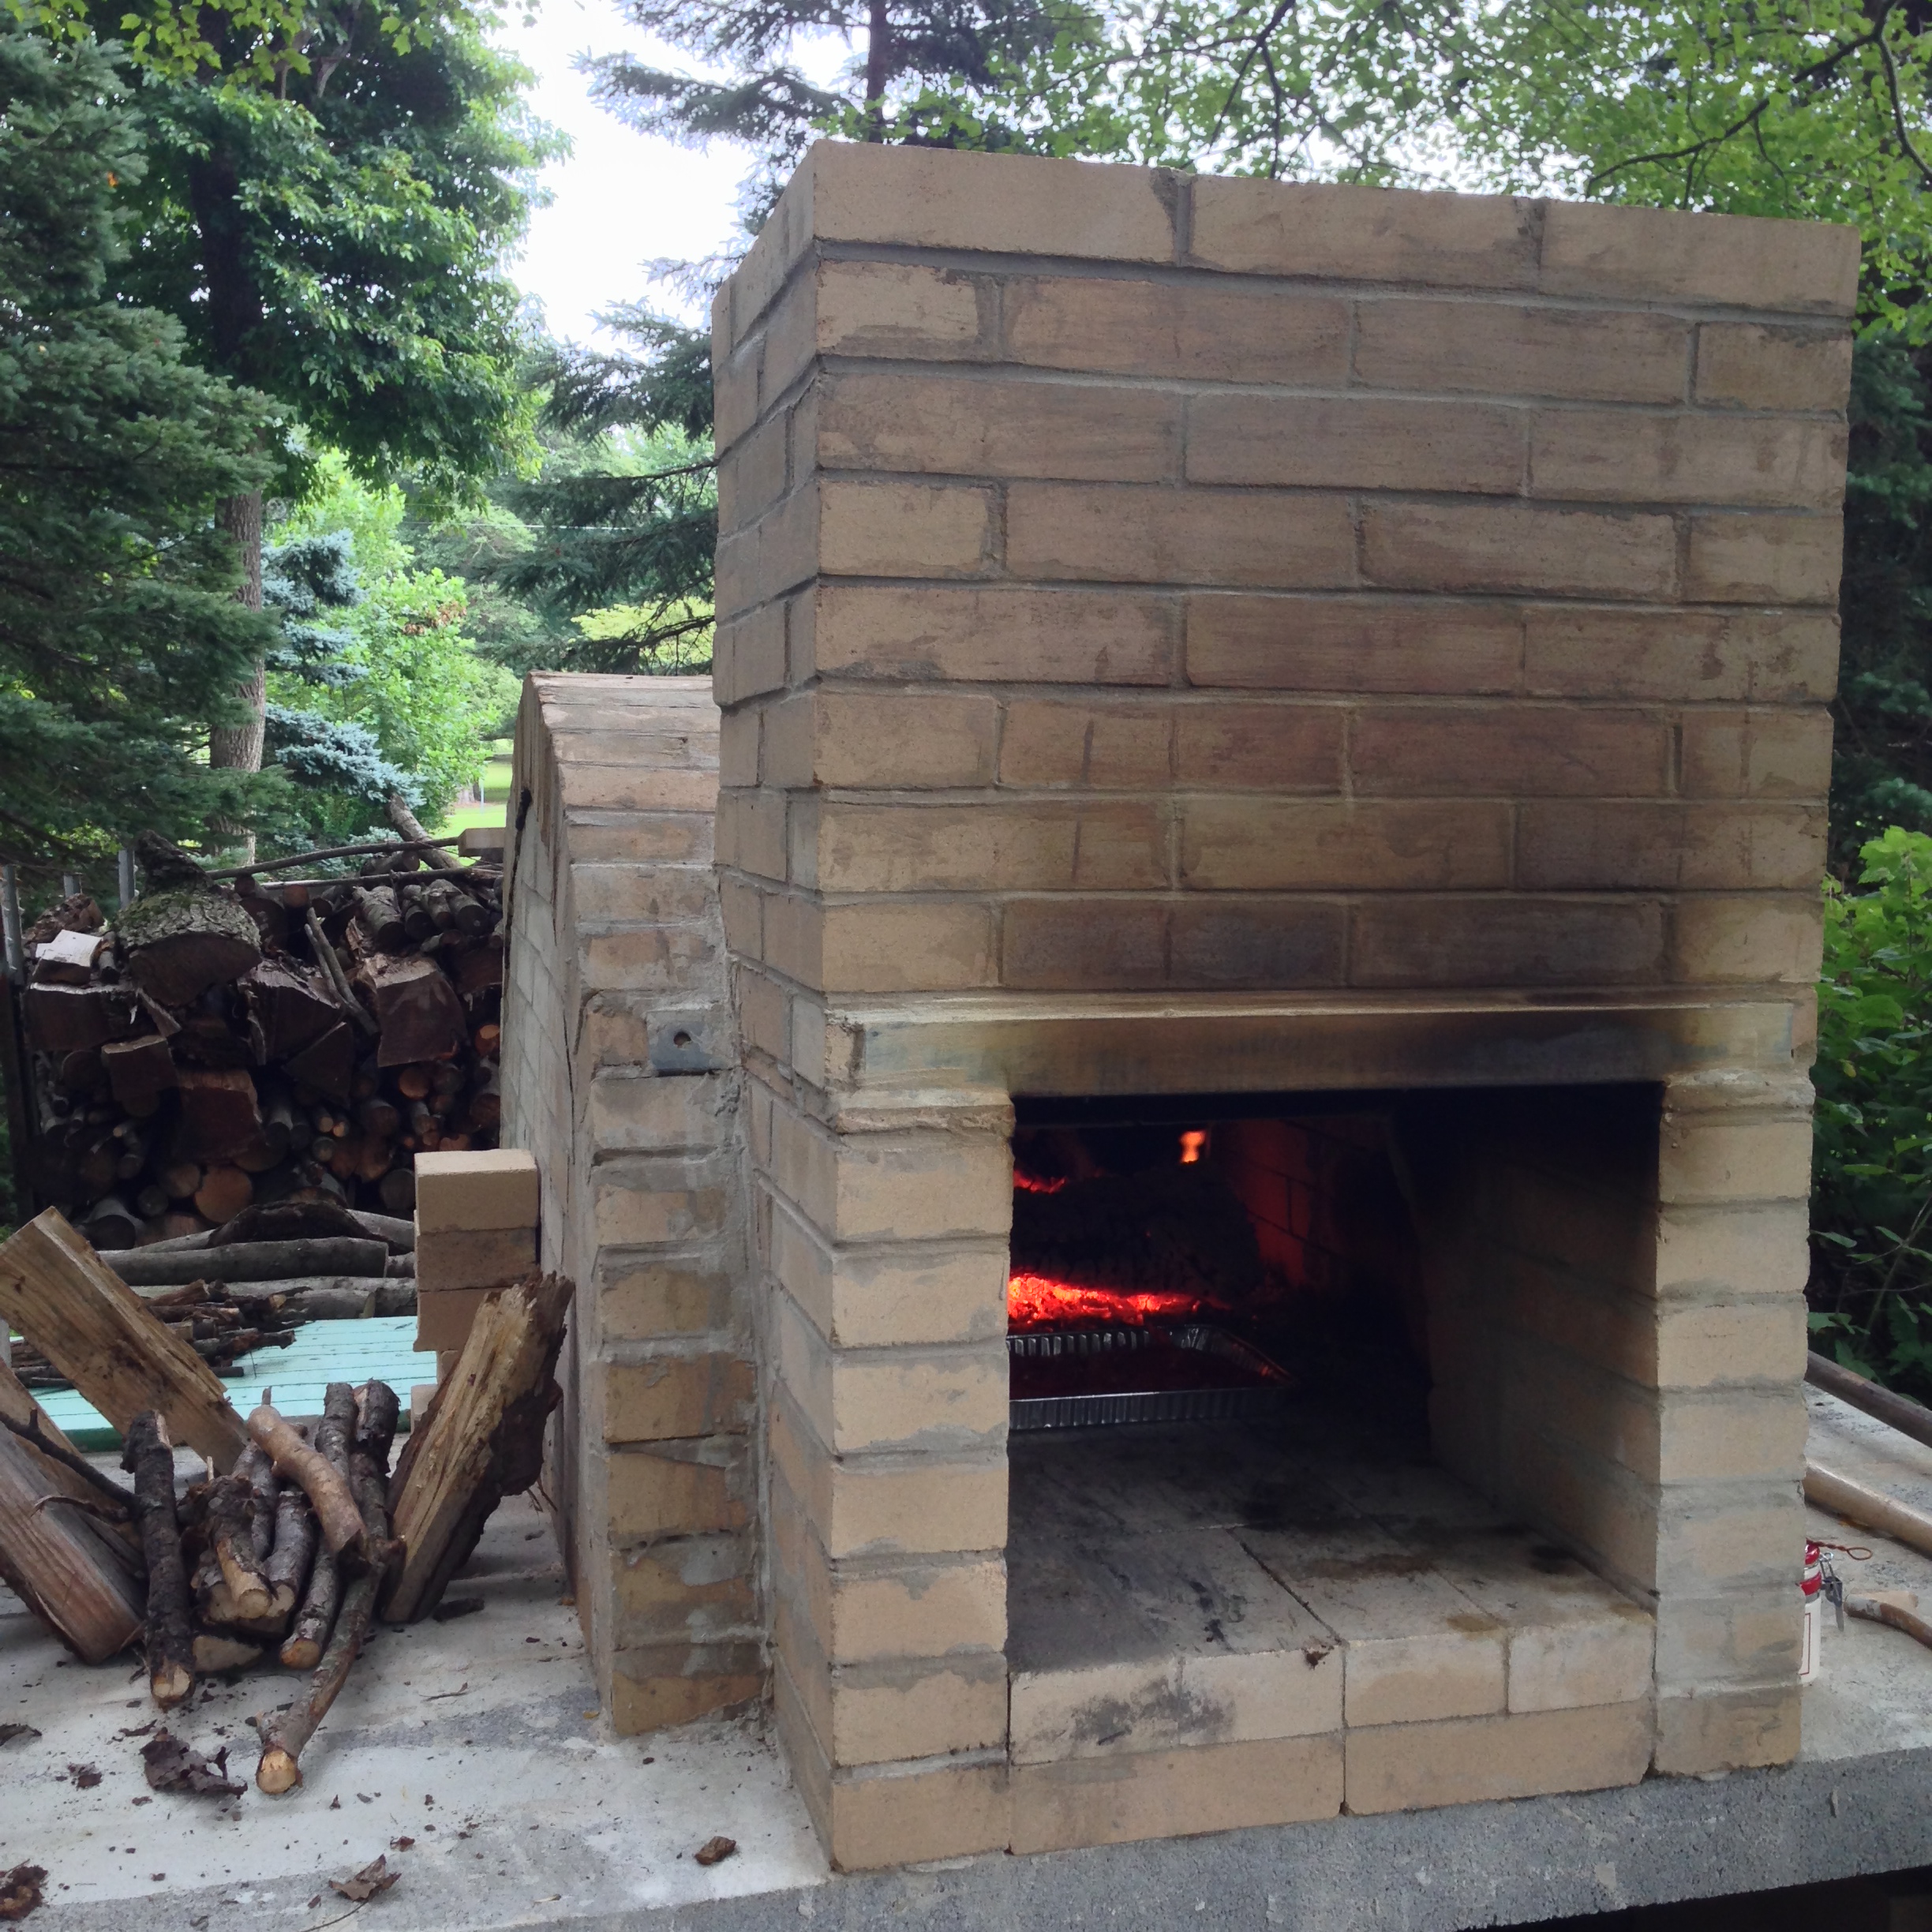 Homemade Wood-Fired #BrickOven: been busy working on a brand new #WoodFiredBrickOven to take all the baked goods to another level. 